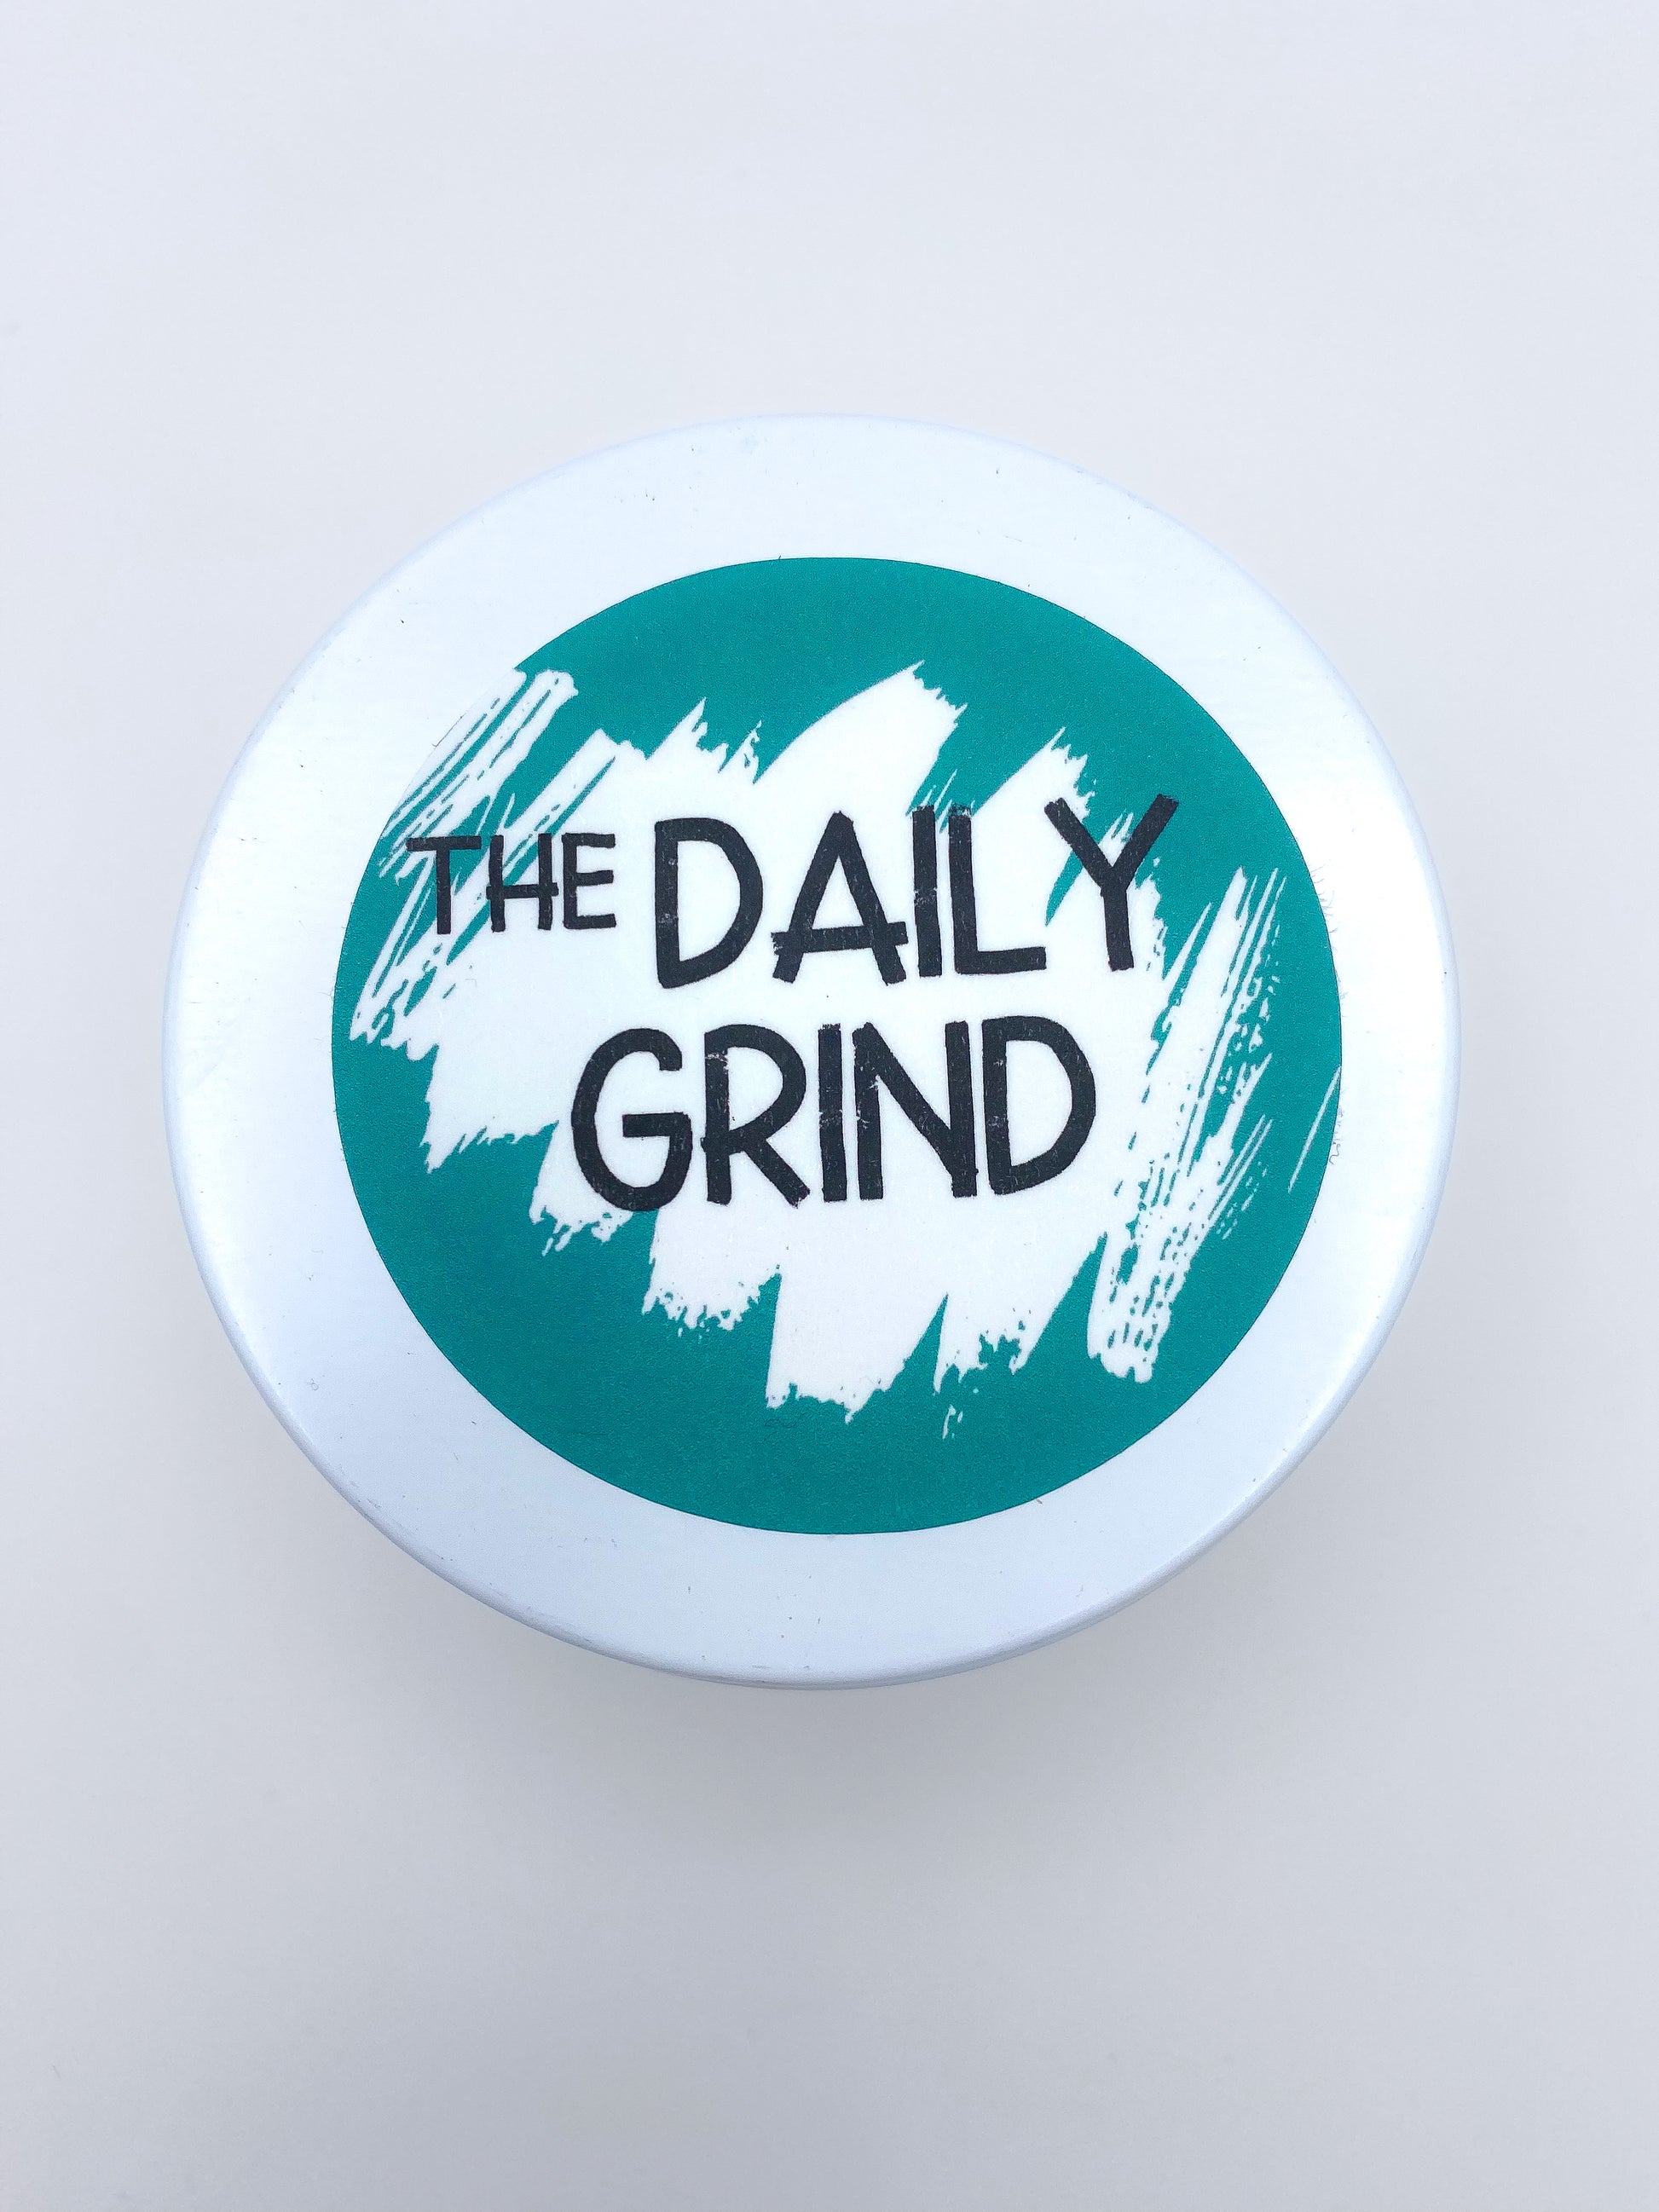 White candle lid with "The Daily Grind" label